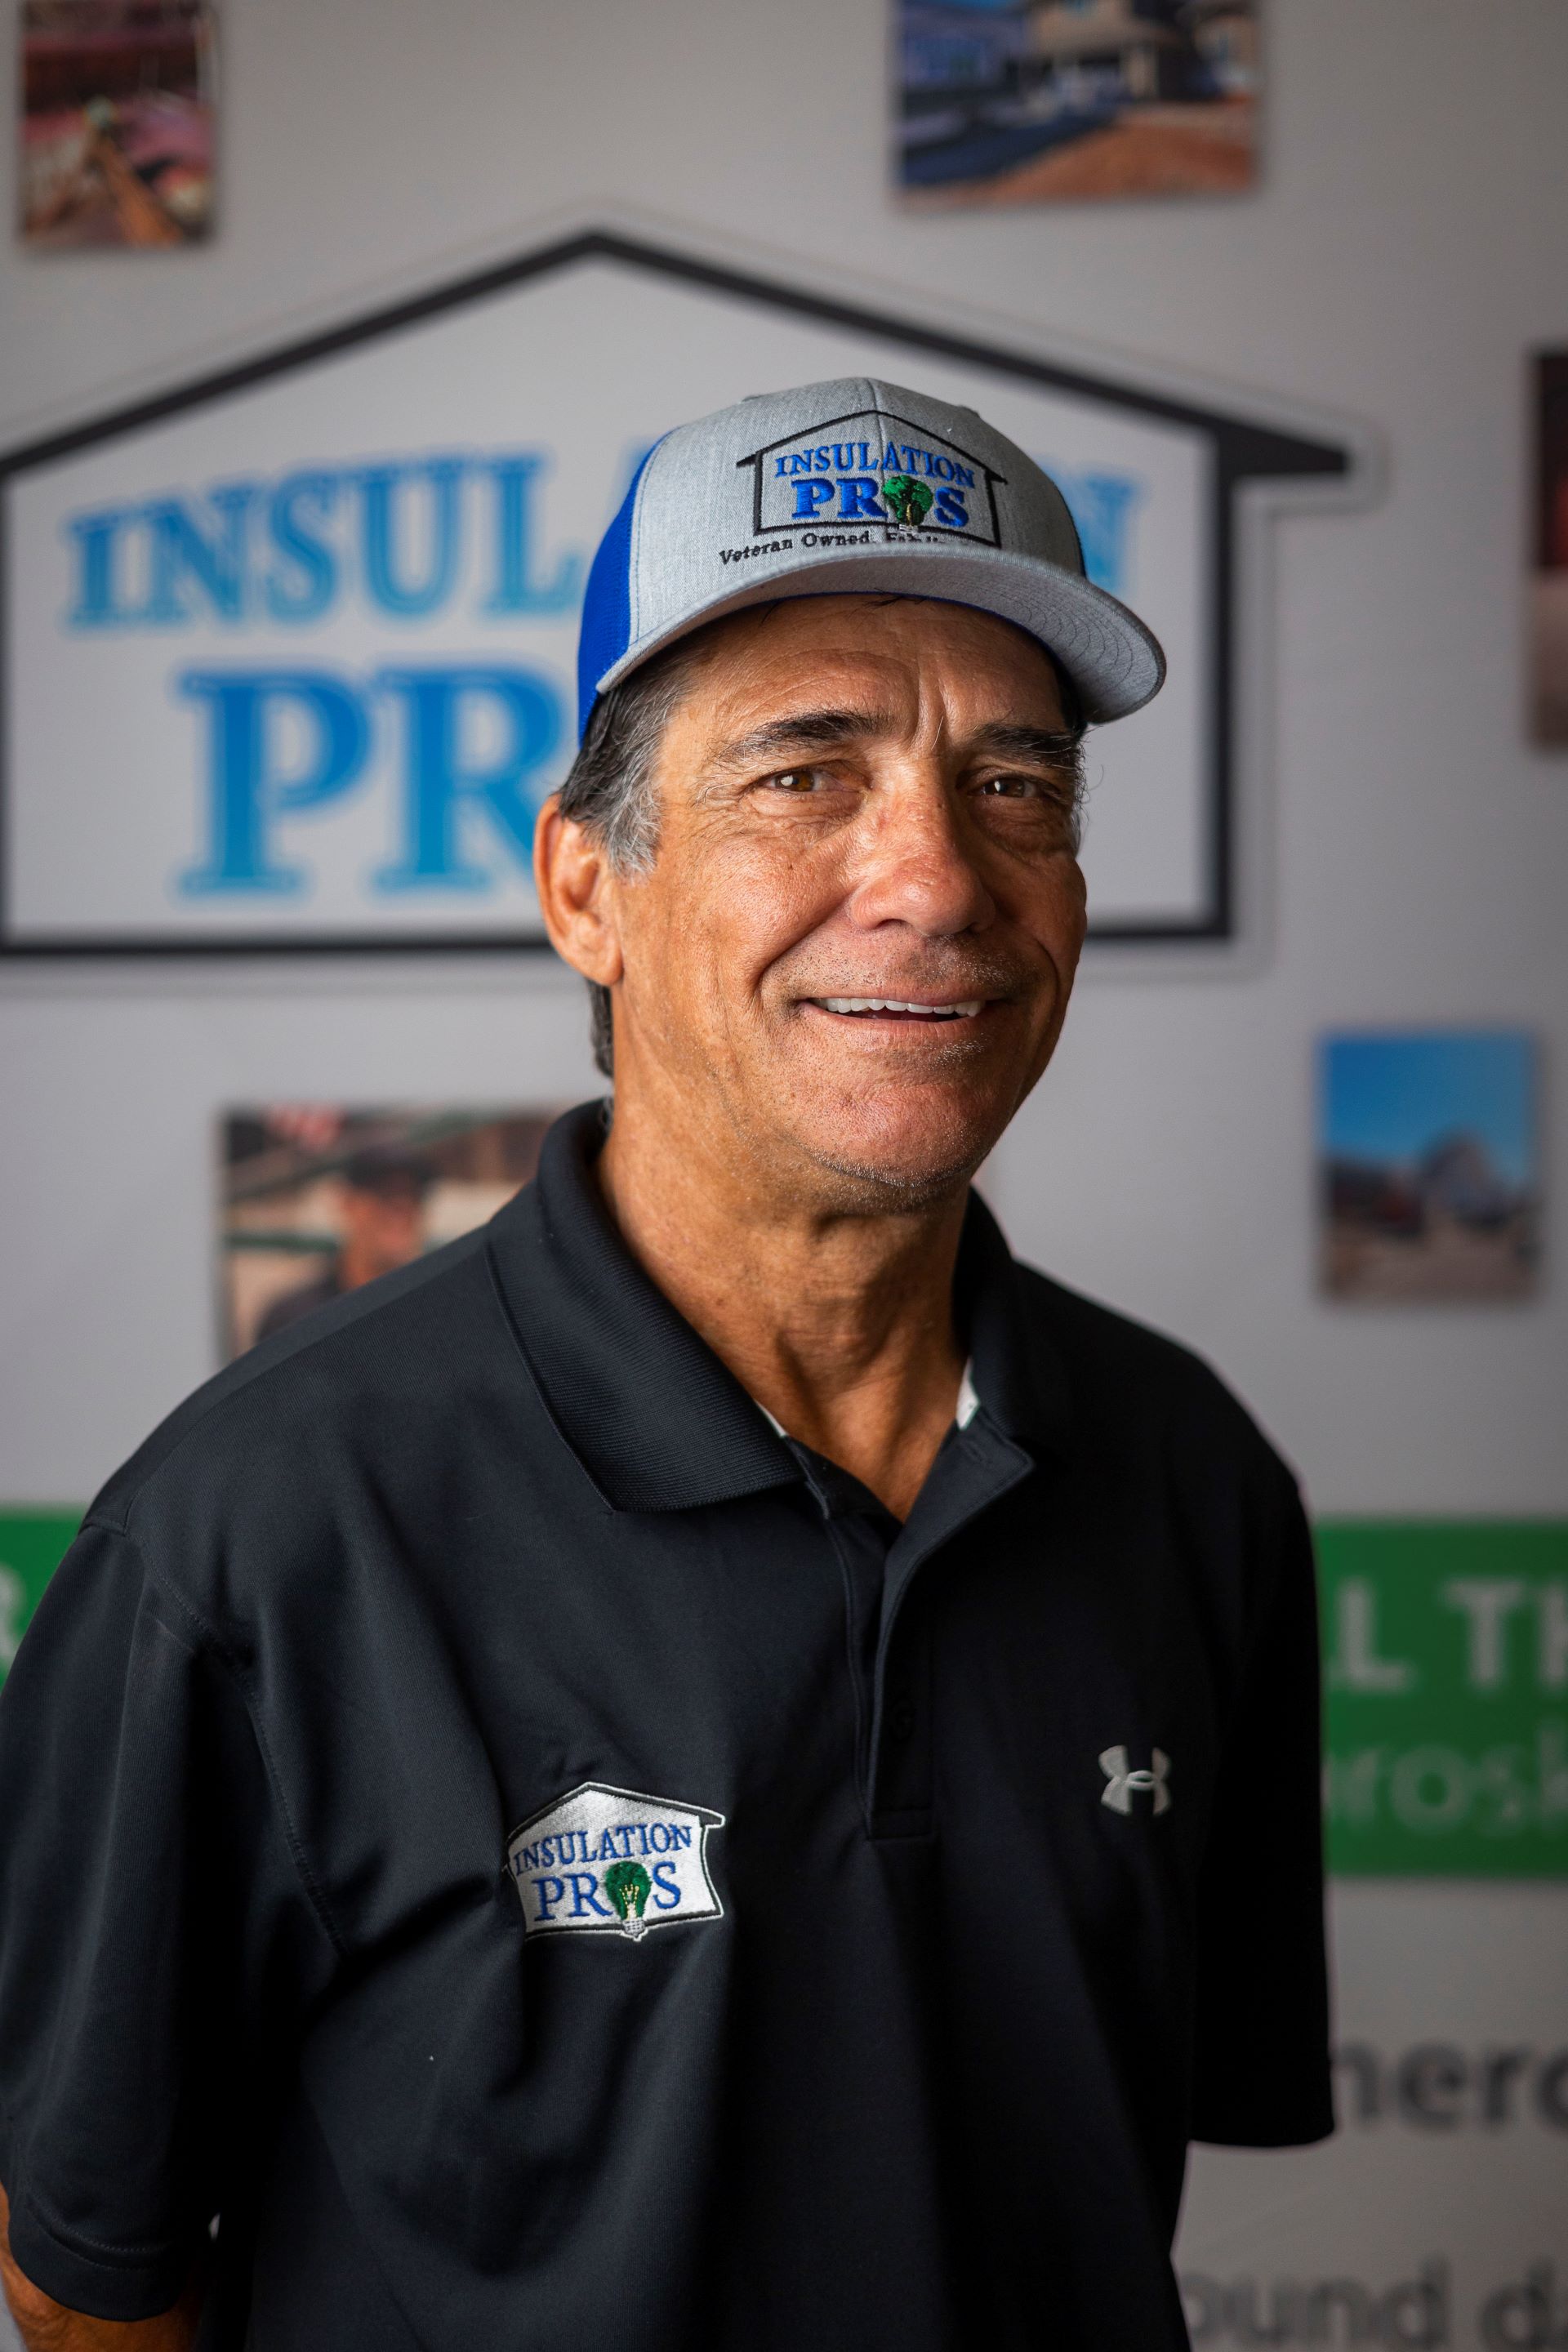 A man wearing a hat and a black shirt is standing in front of a sign that says insulation pro.